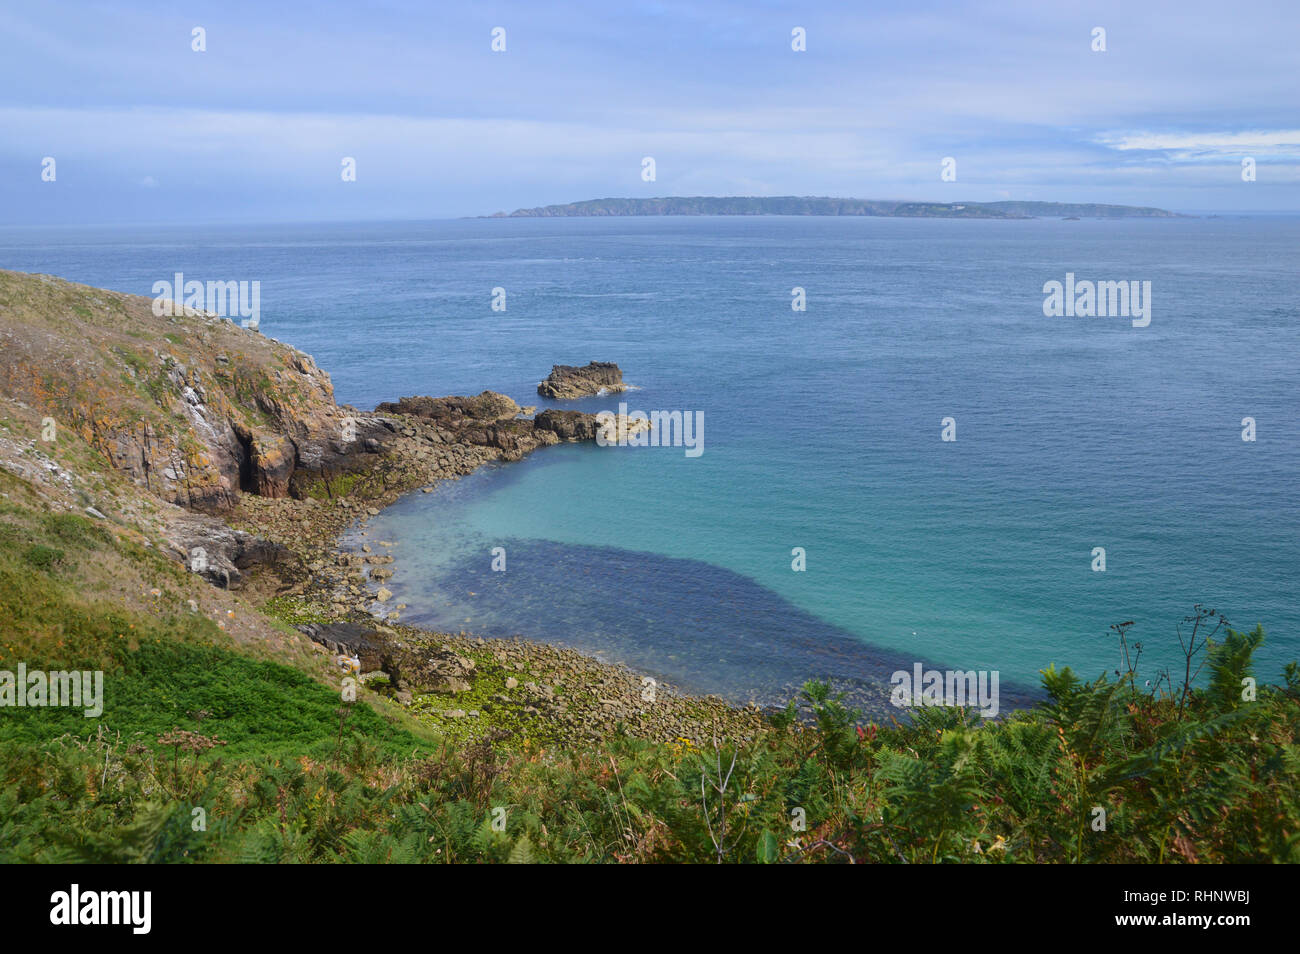 The Island of Alderney from the Coastal Path on Cliffs near Rosiere Steps on Herm Island, Channel Islands.UK. Stock Photo